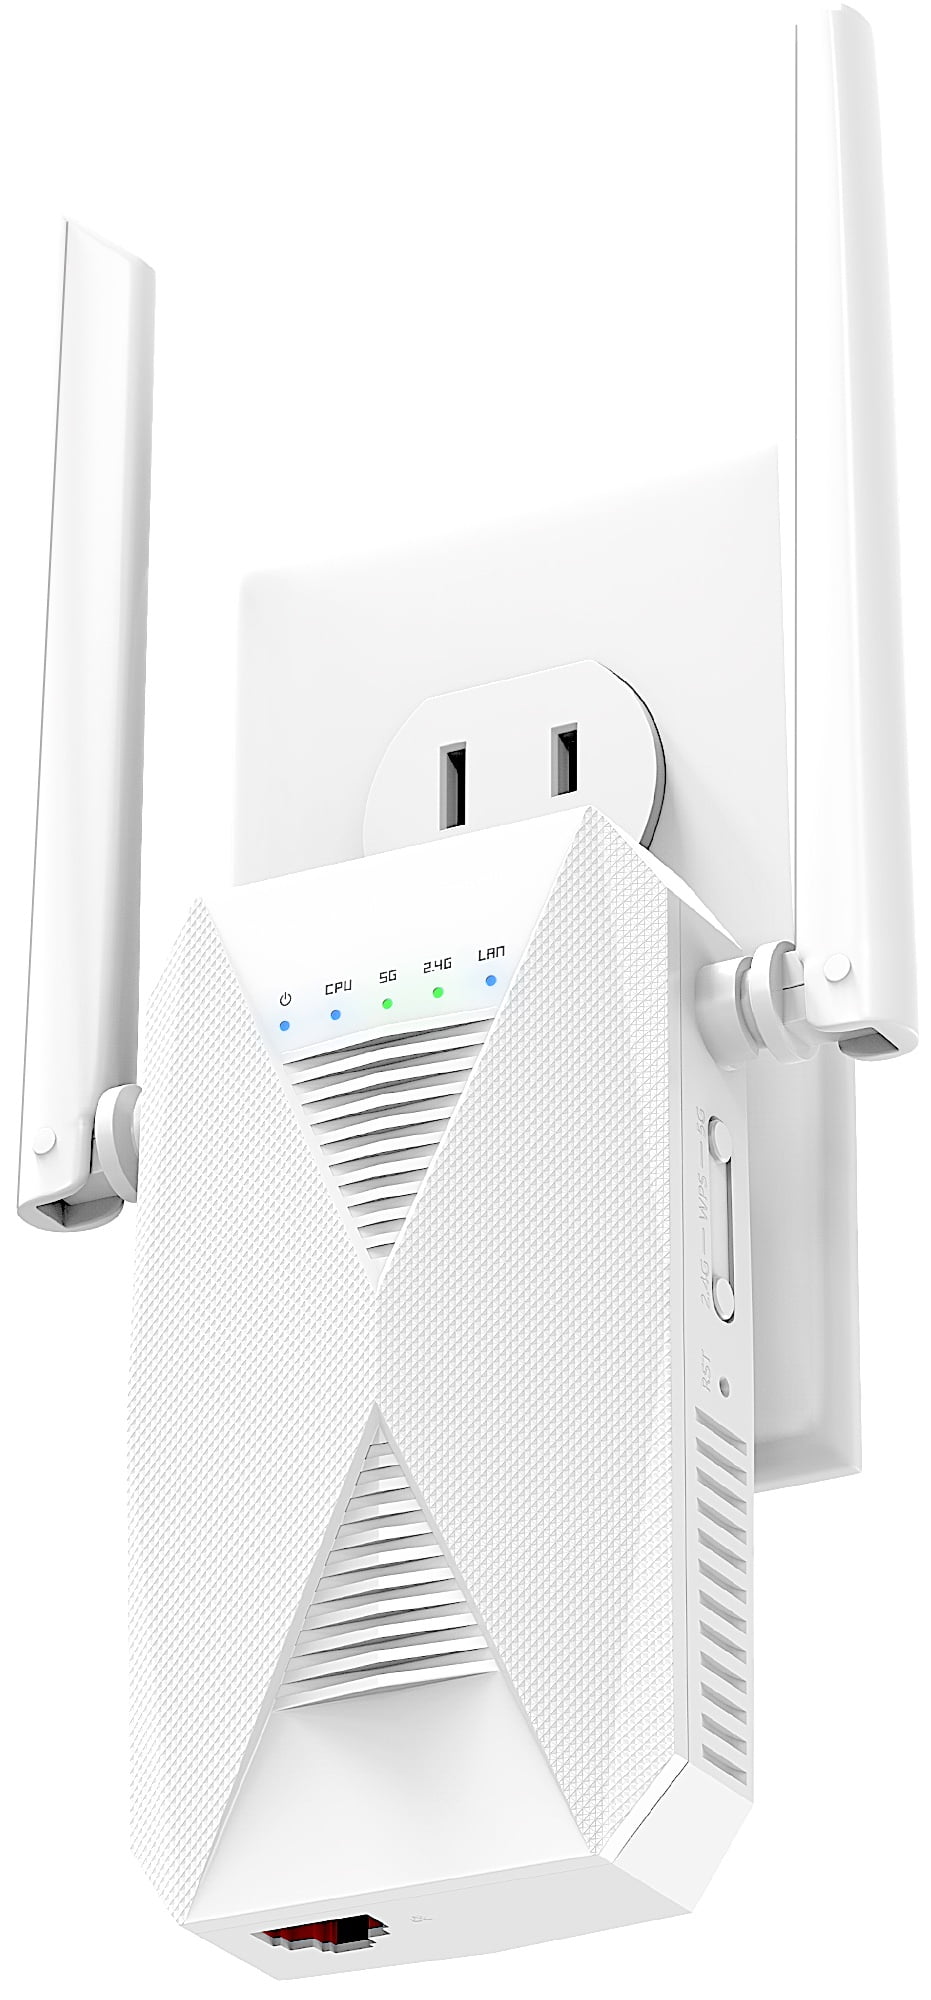 Wifi Repeater Extender Access Point Router 2.4ghz 150mbps 5ghz 433mbps 1000MW 